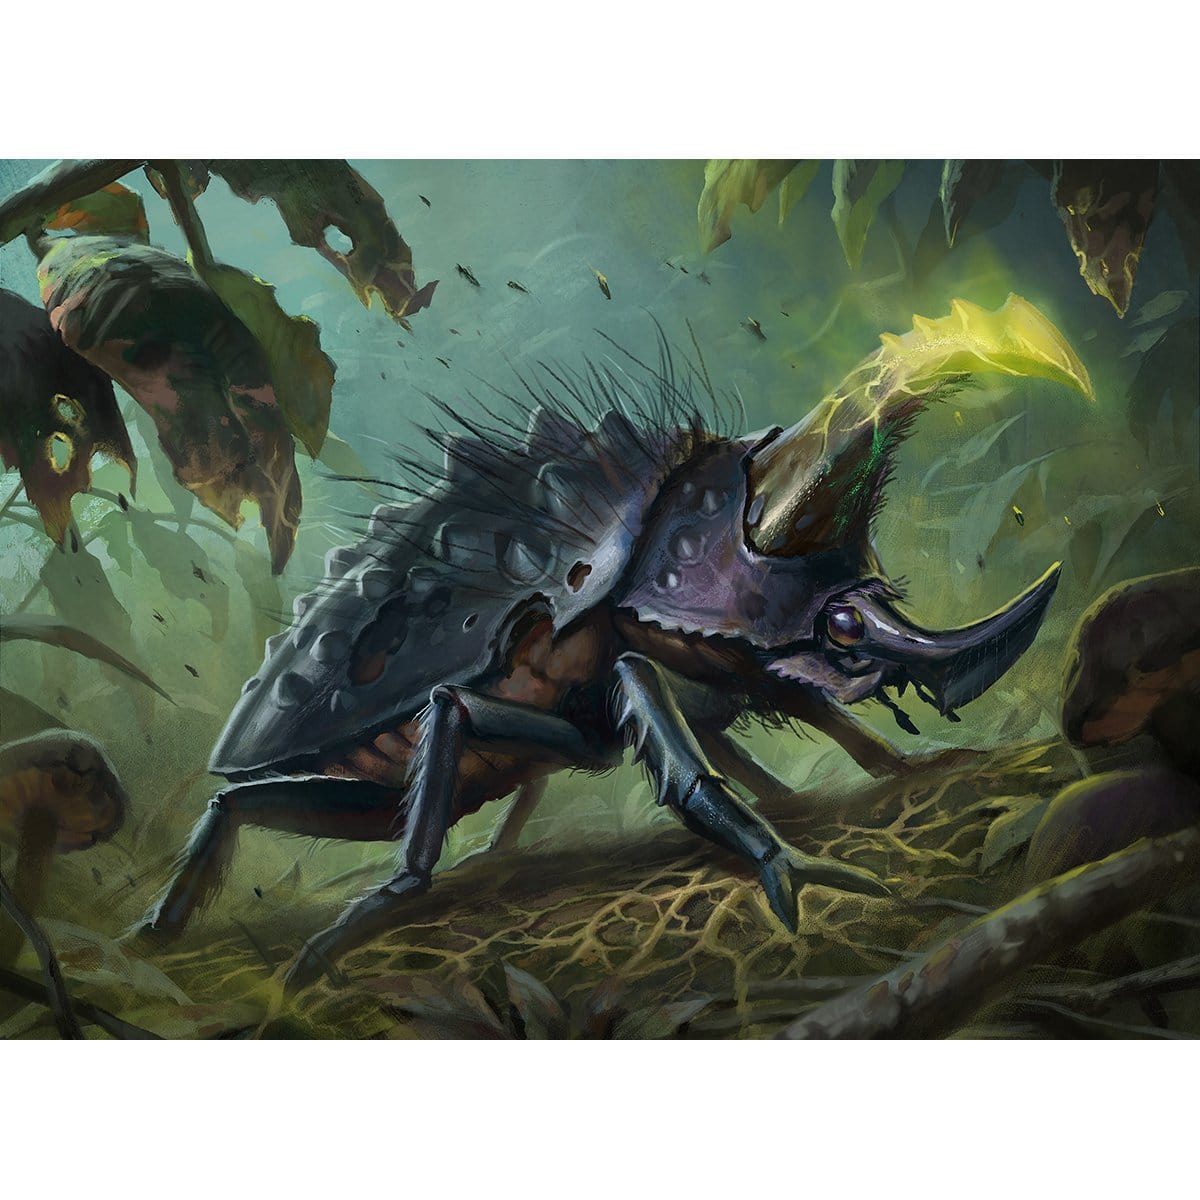 Blightbeetle Print - Print - Original Magic Art - Accessories for Magic the Gathering and other card games